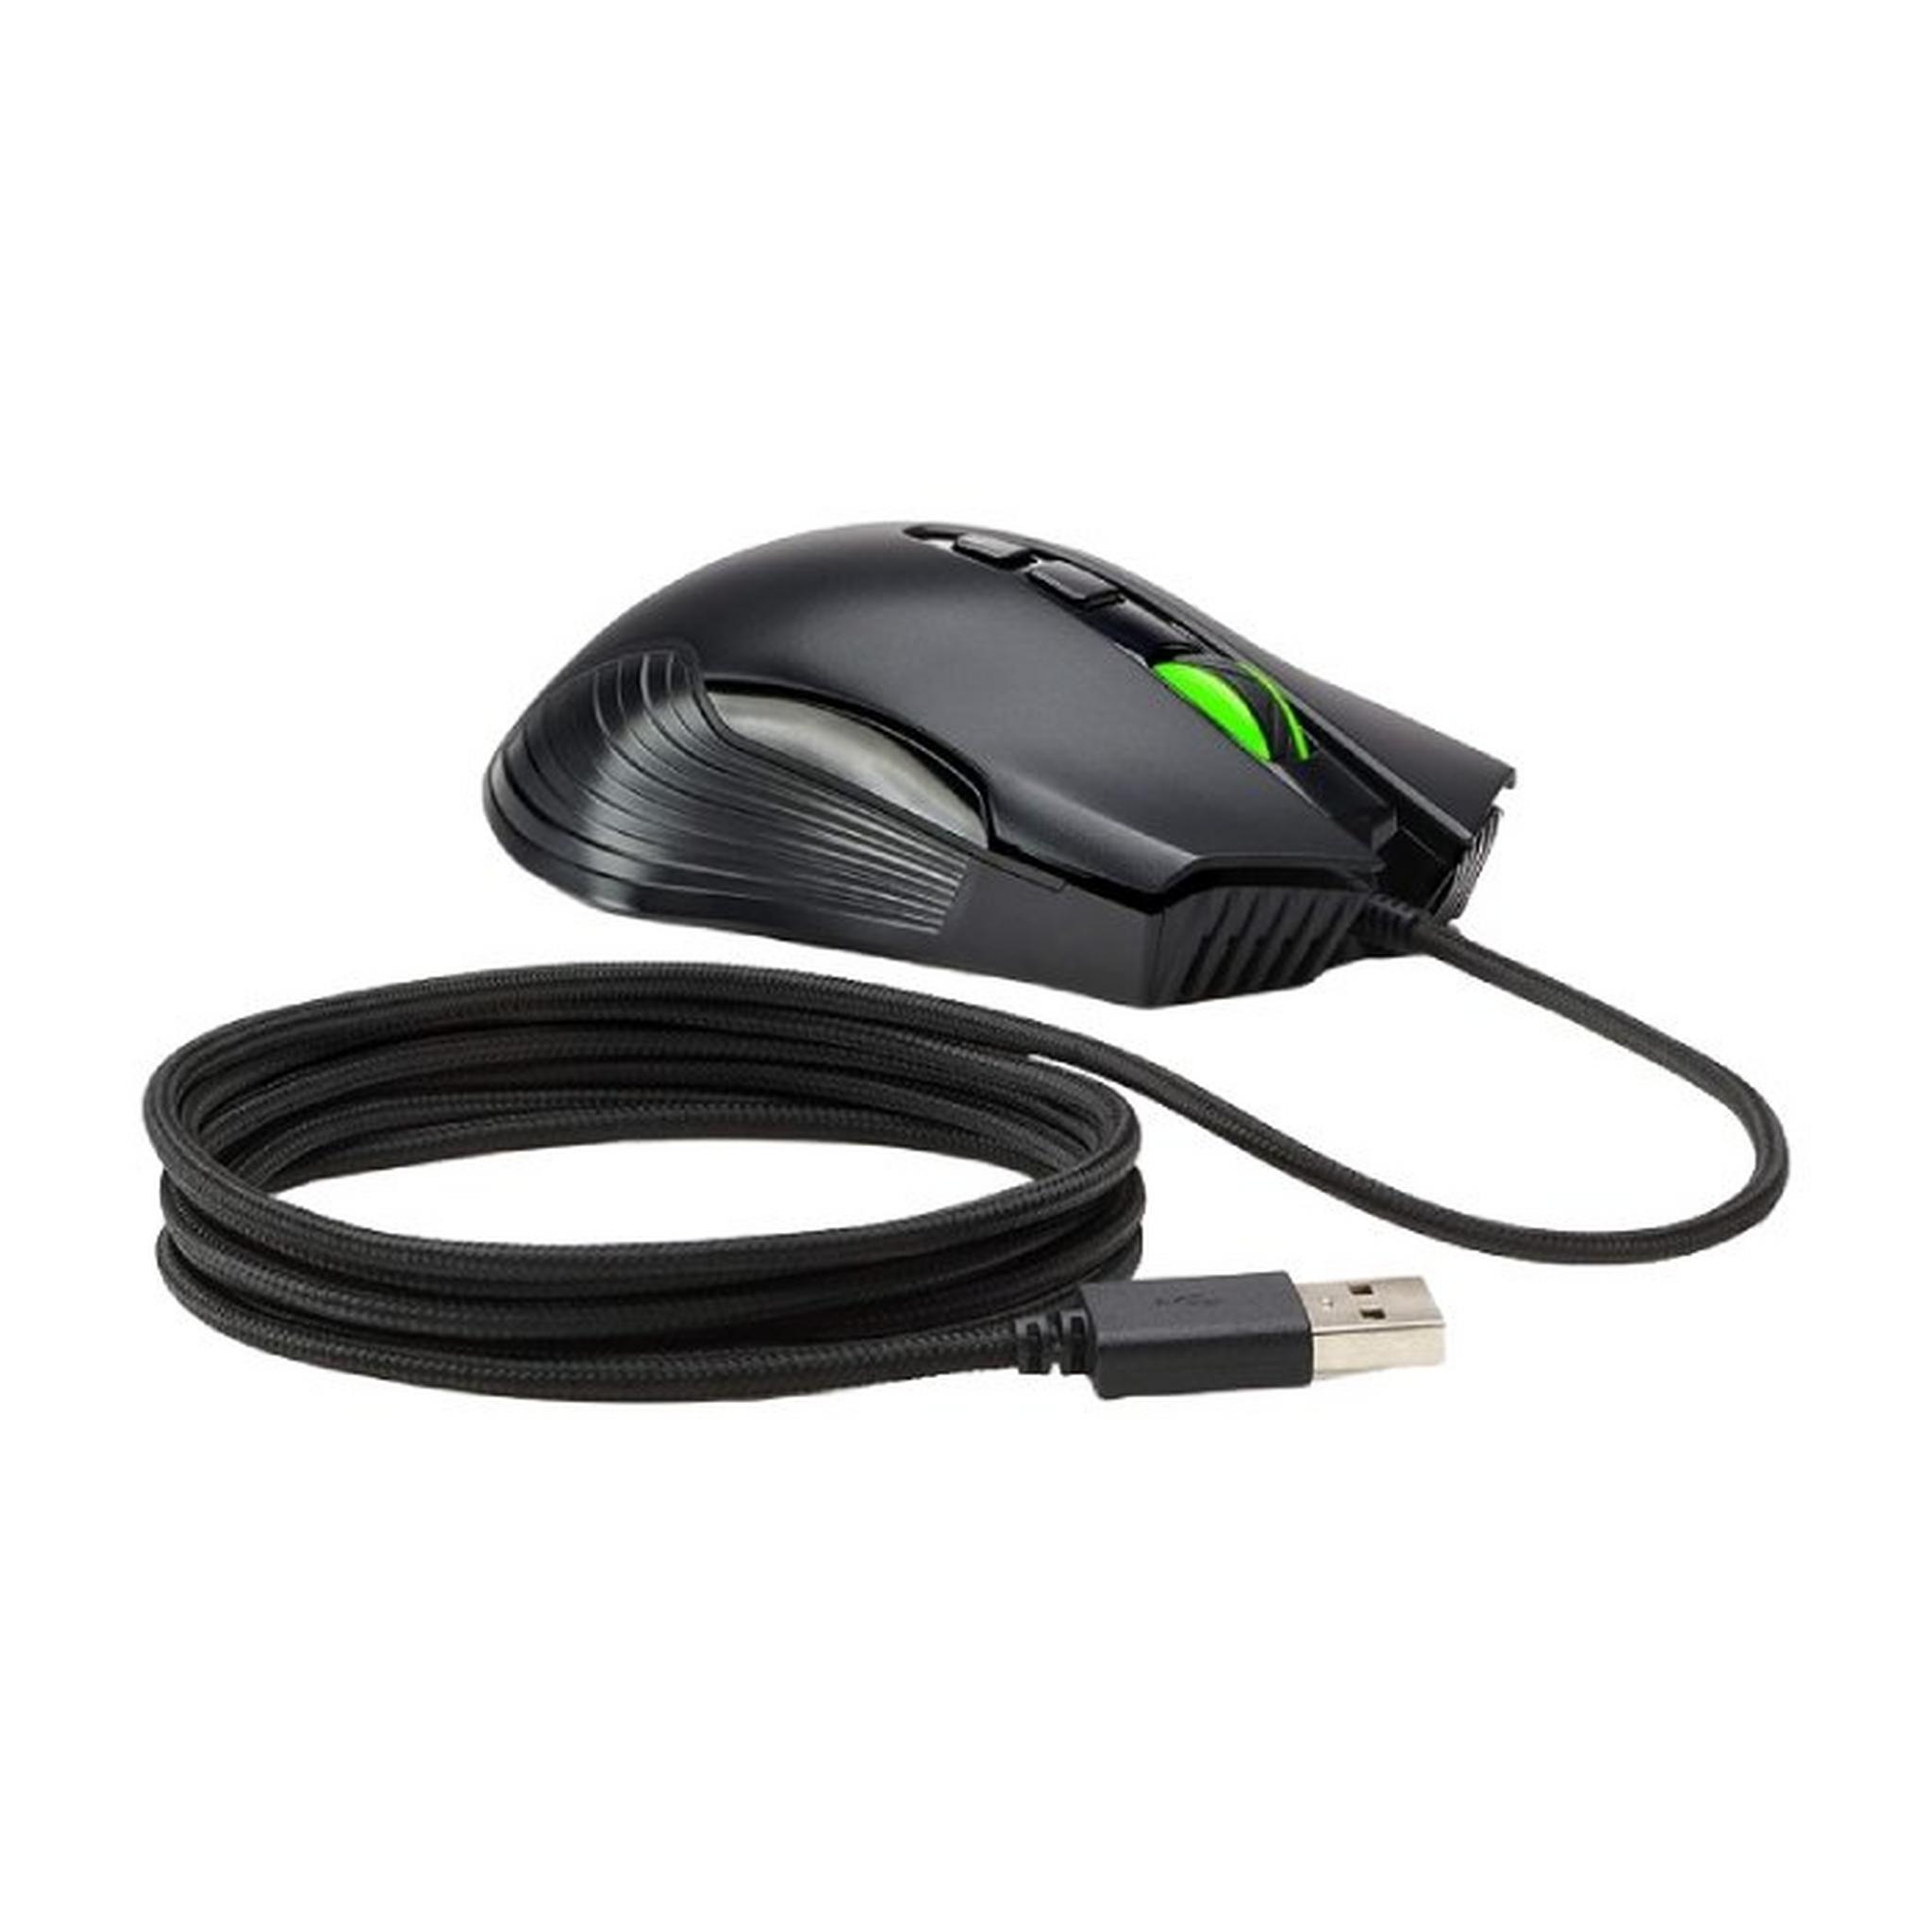 HP X220 Wired Backlit Gaming Mouse